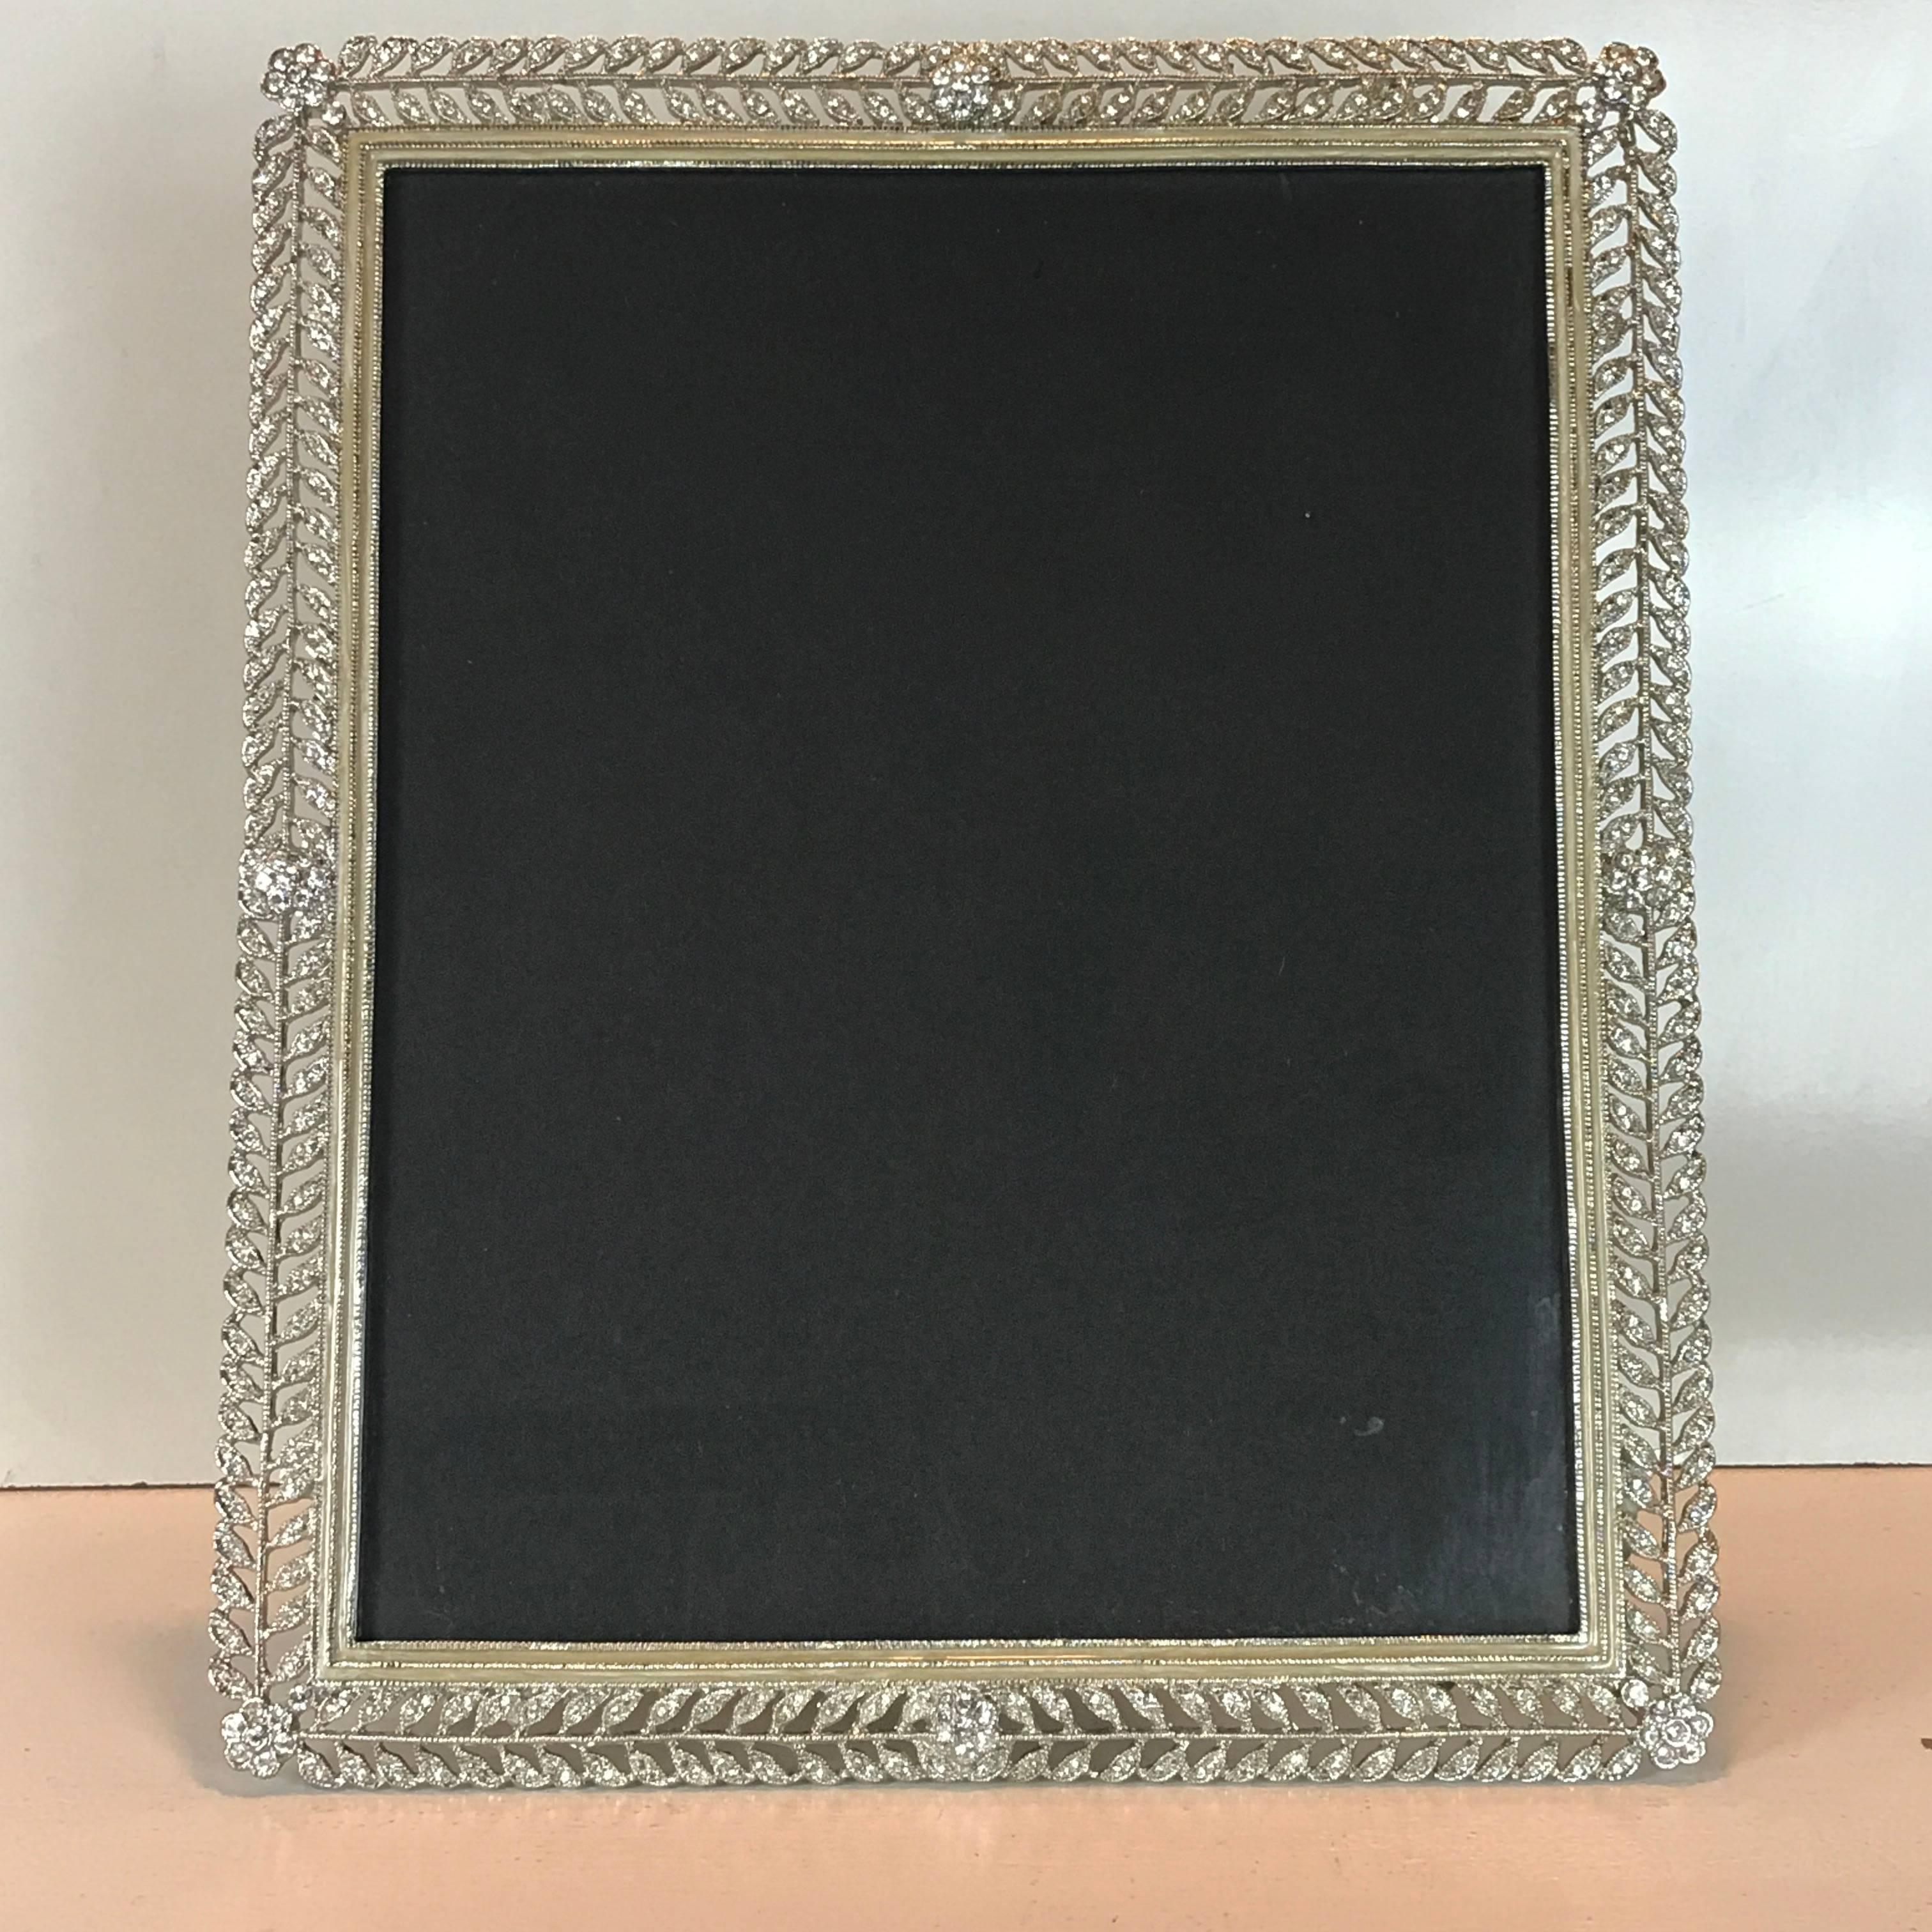 Exquisite paste Russian style frame, with enamel surround, will display a 7.5